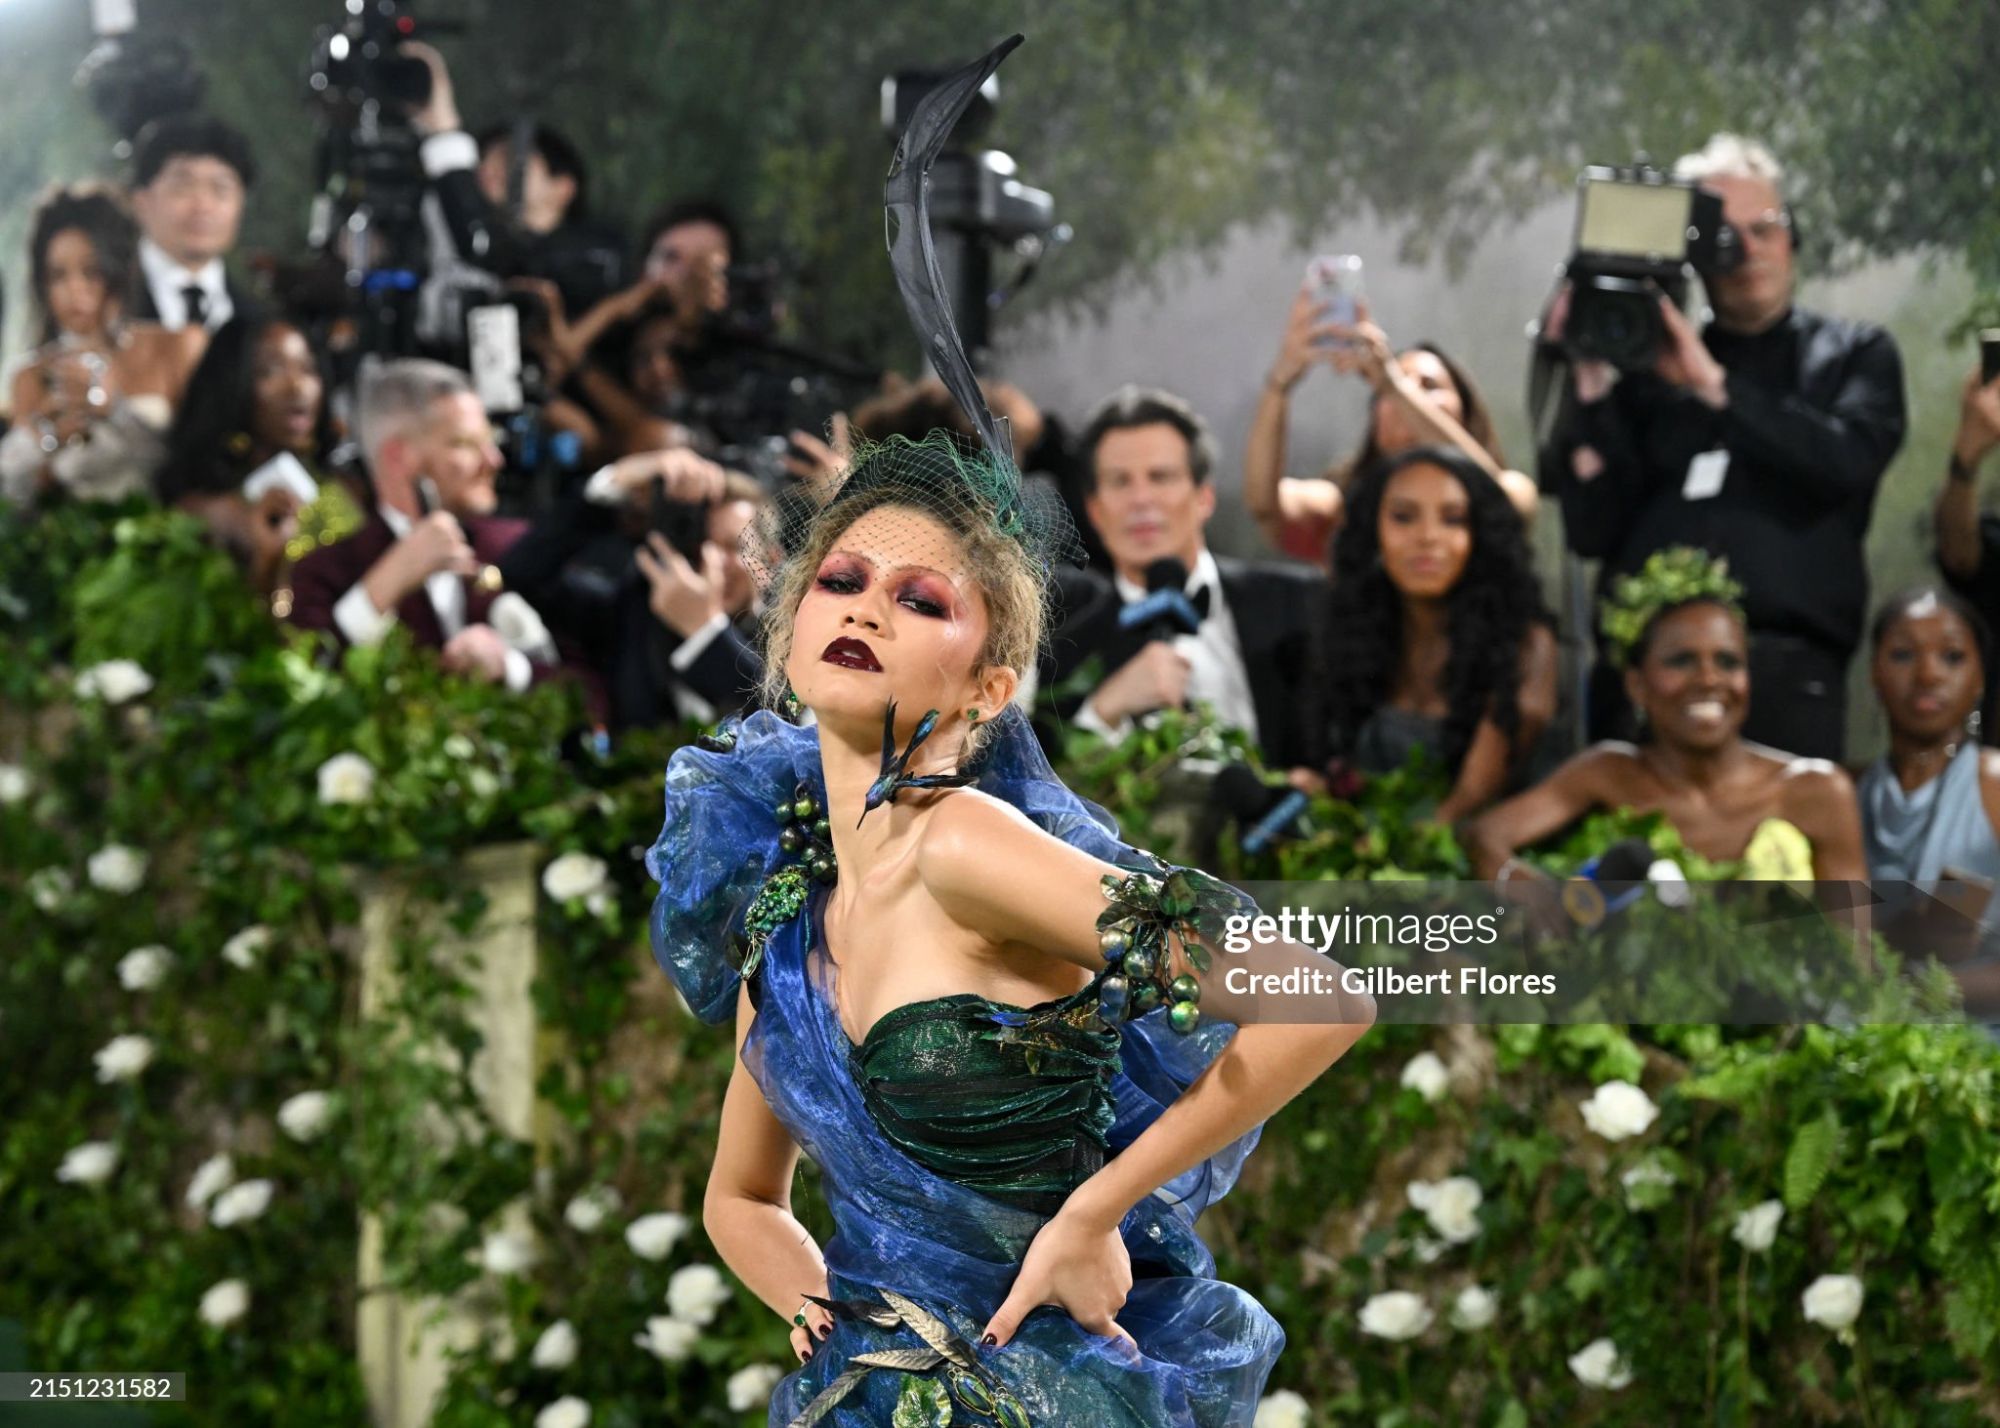 gettyimages-2151231582-2048x2048.jpg